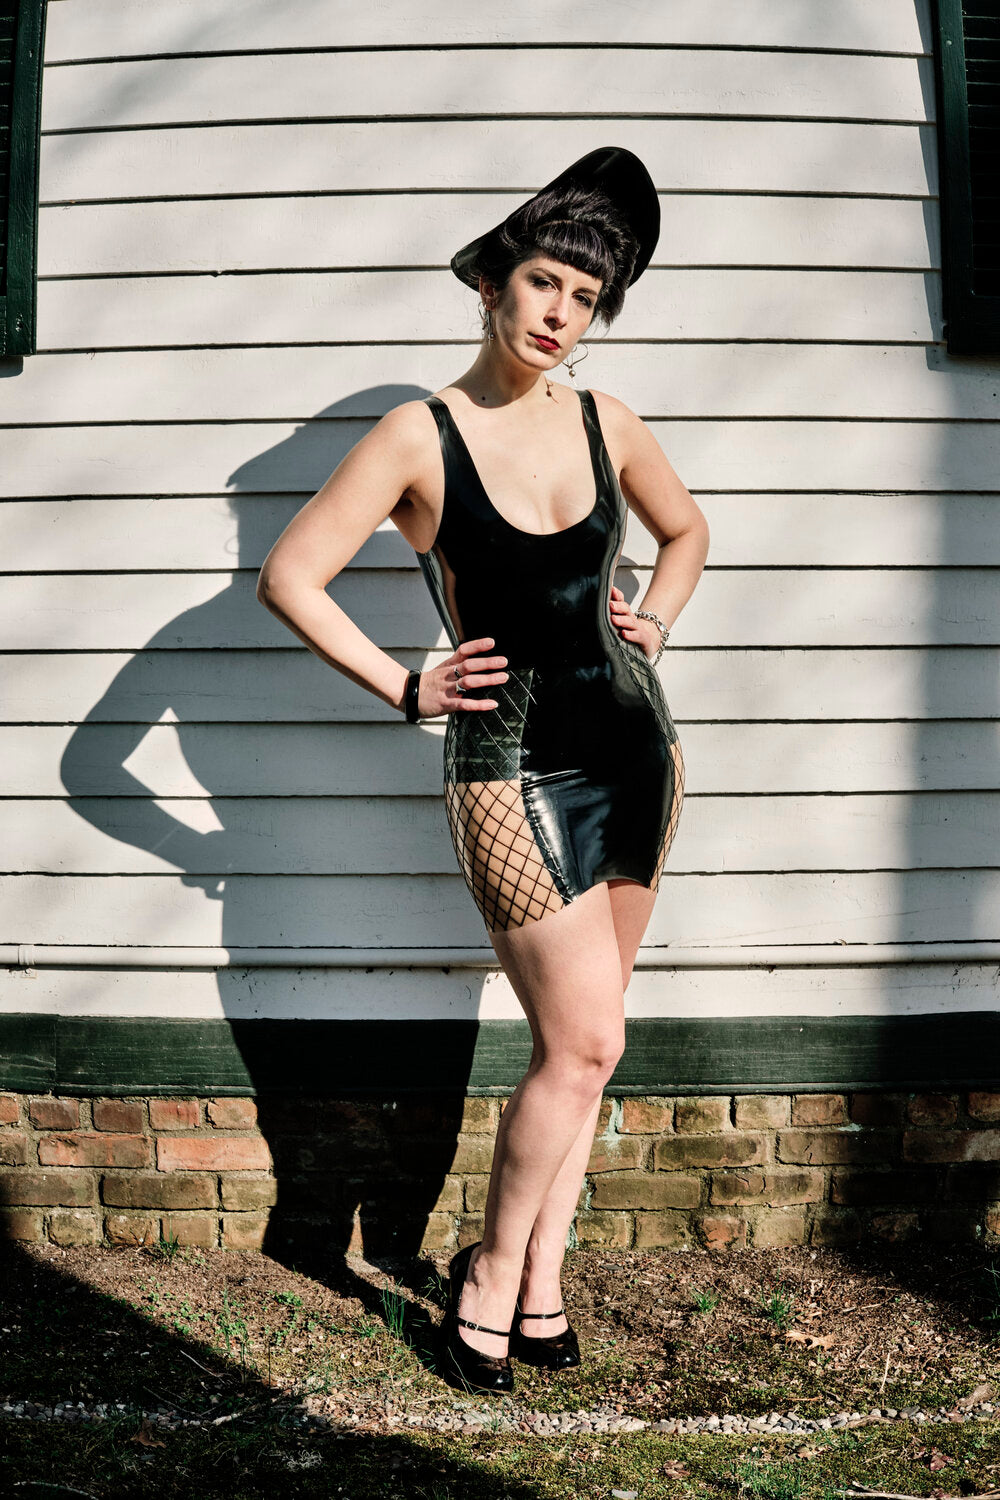 A model standing outside against a wall wearing a black latex tank top and the black and transparent fishnet Latex Specialty Girdle Skirt.